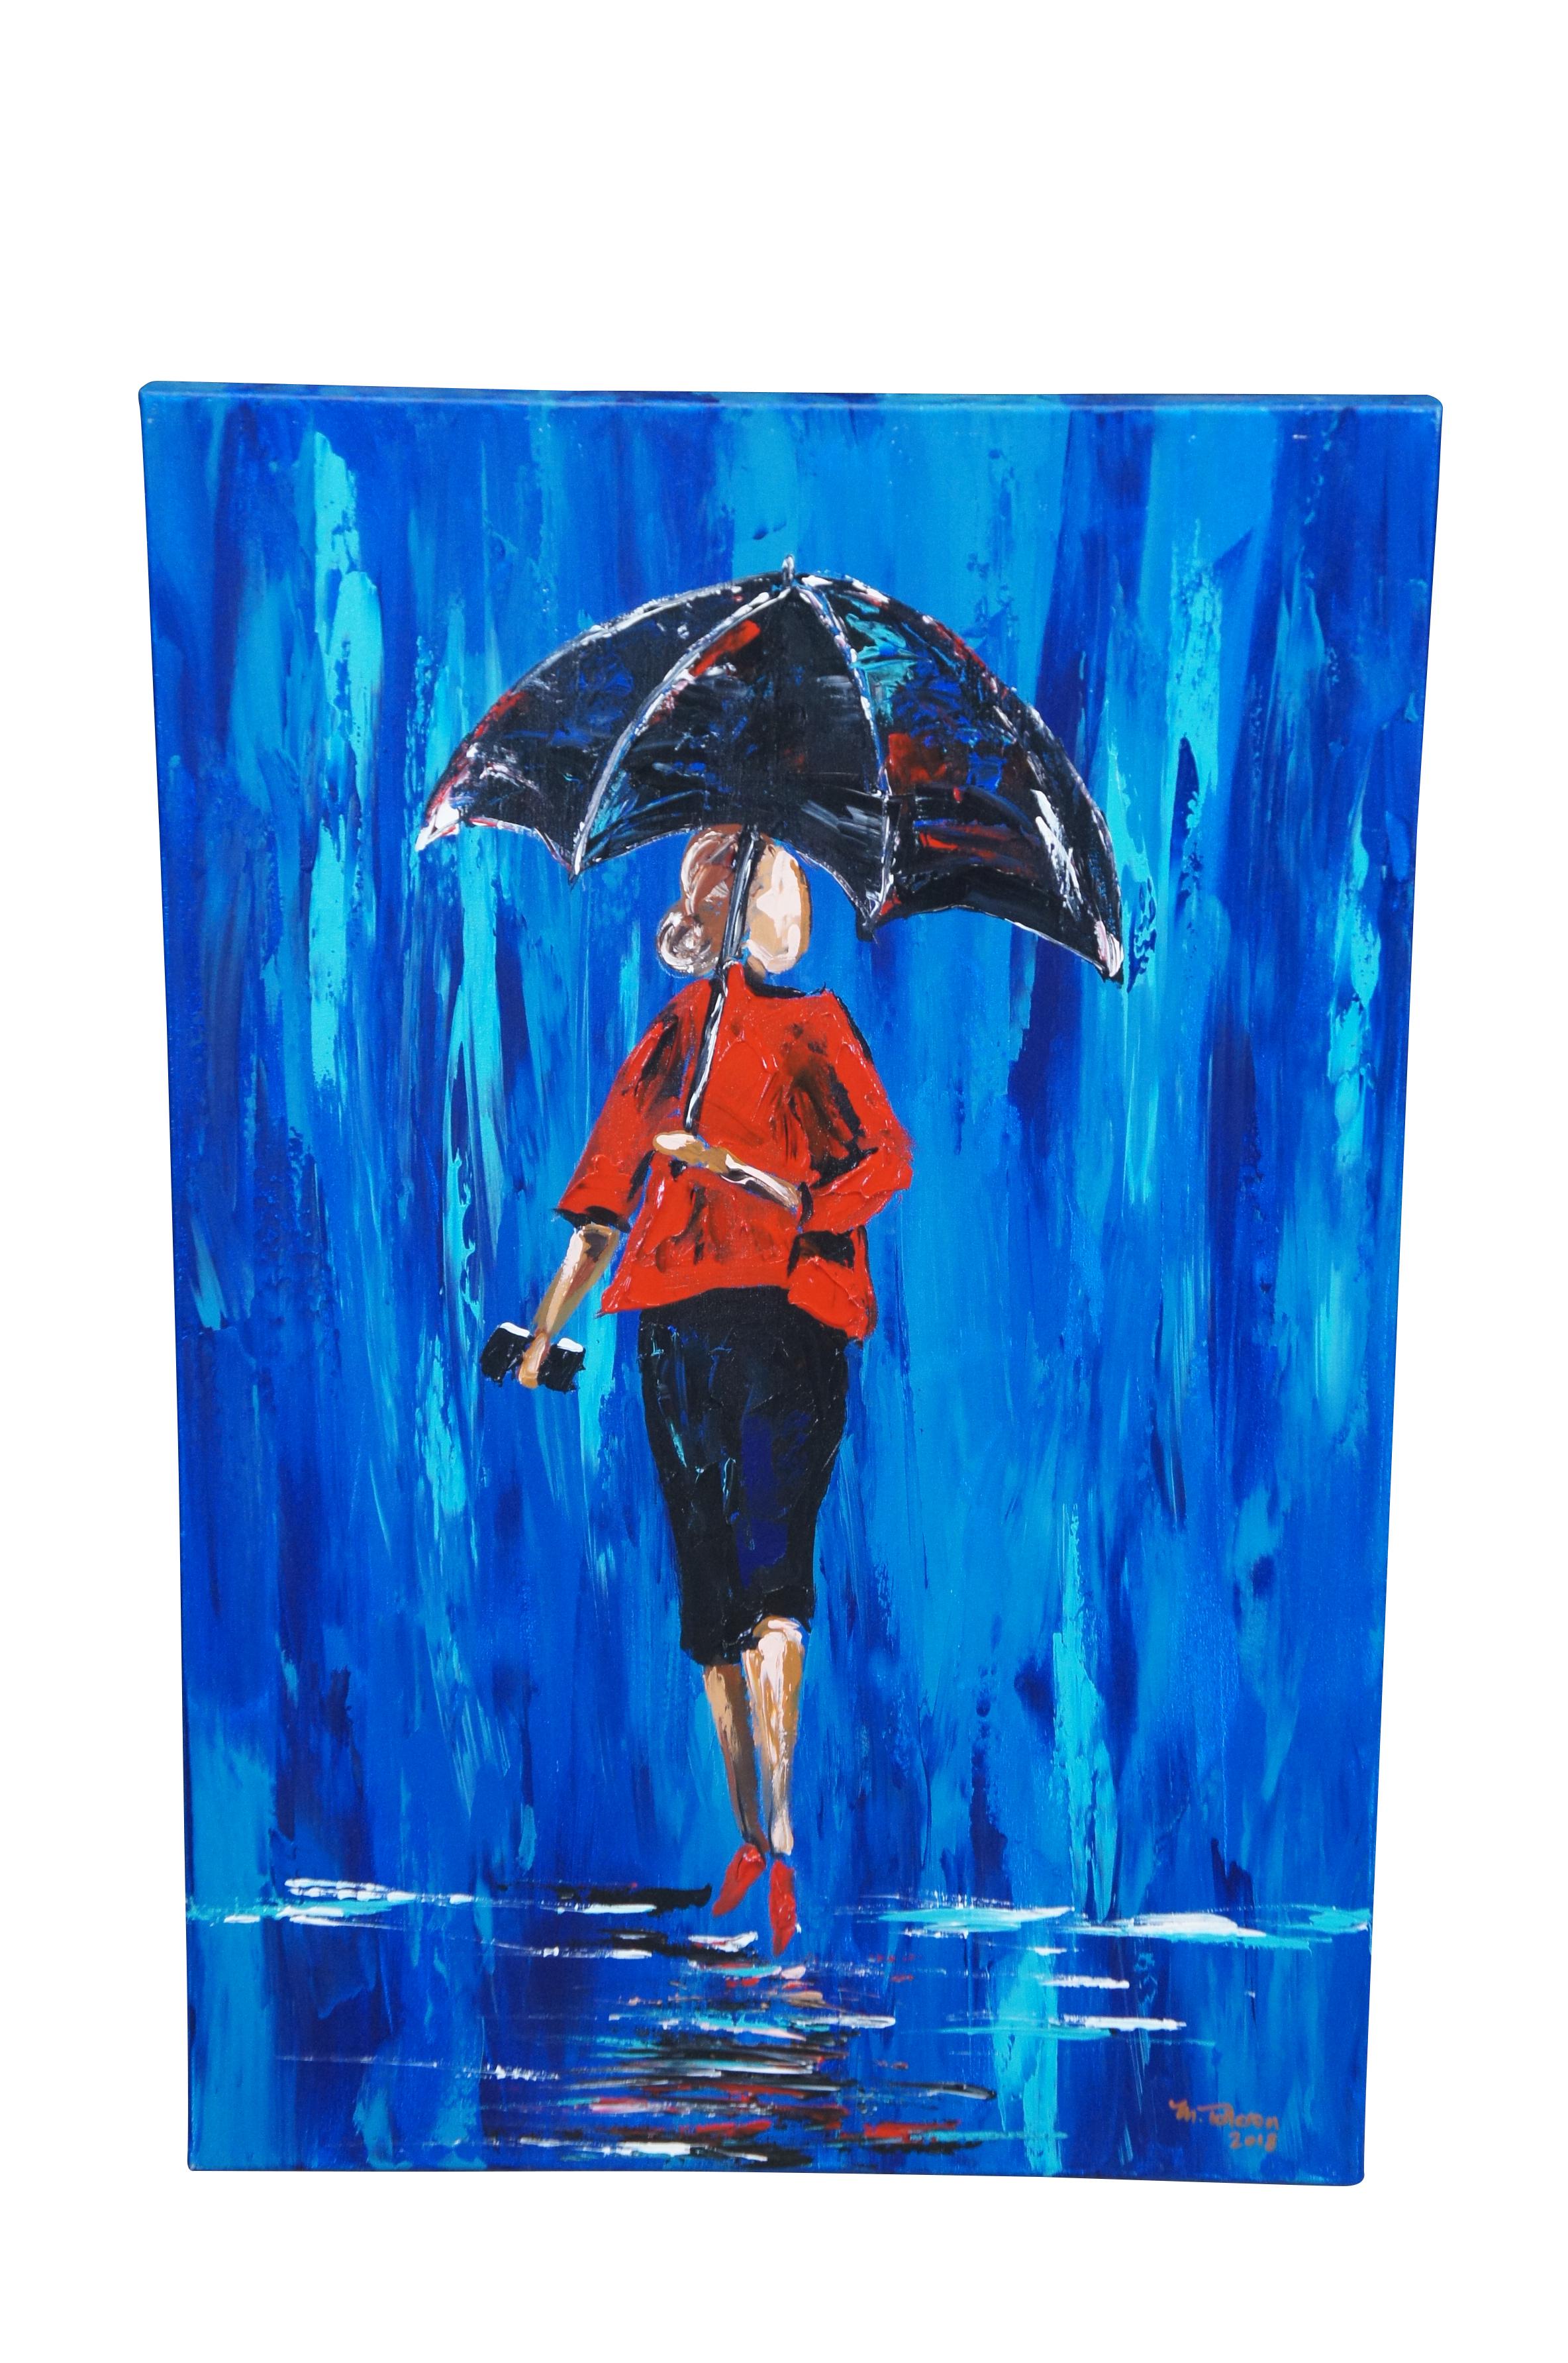 Expressionist 2 Michael Tolleson Robles Women Walking w Umbrellas in Rain Oil Paintings 36